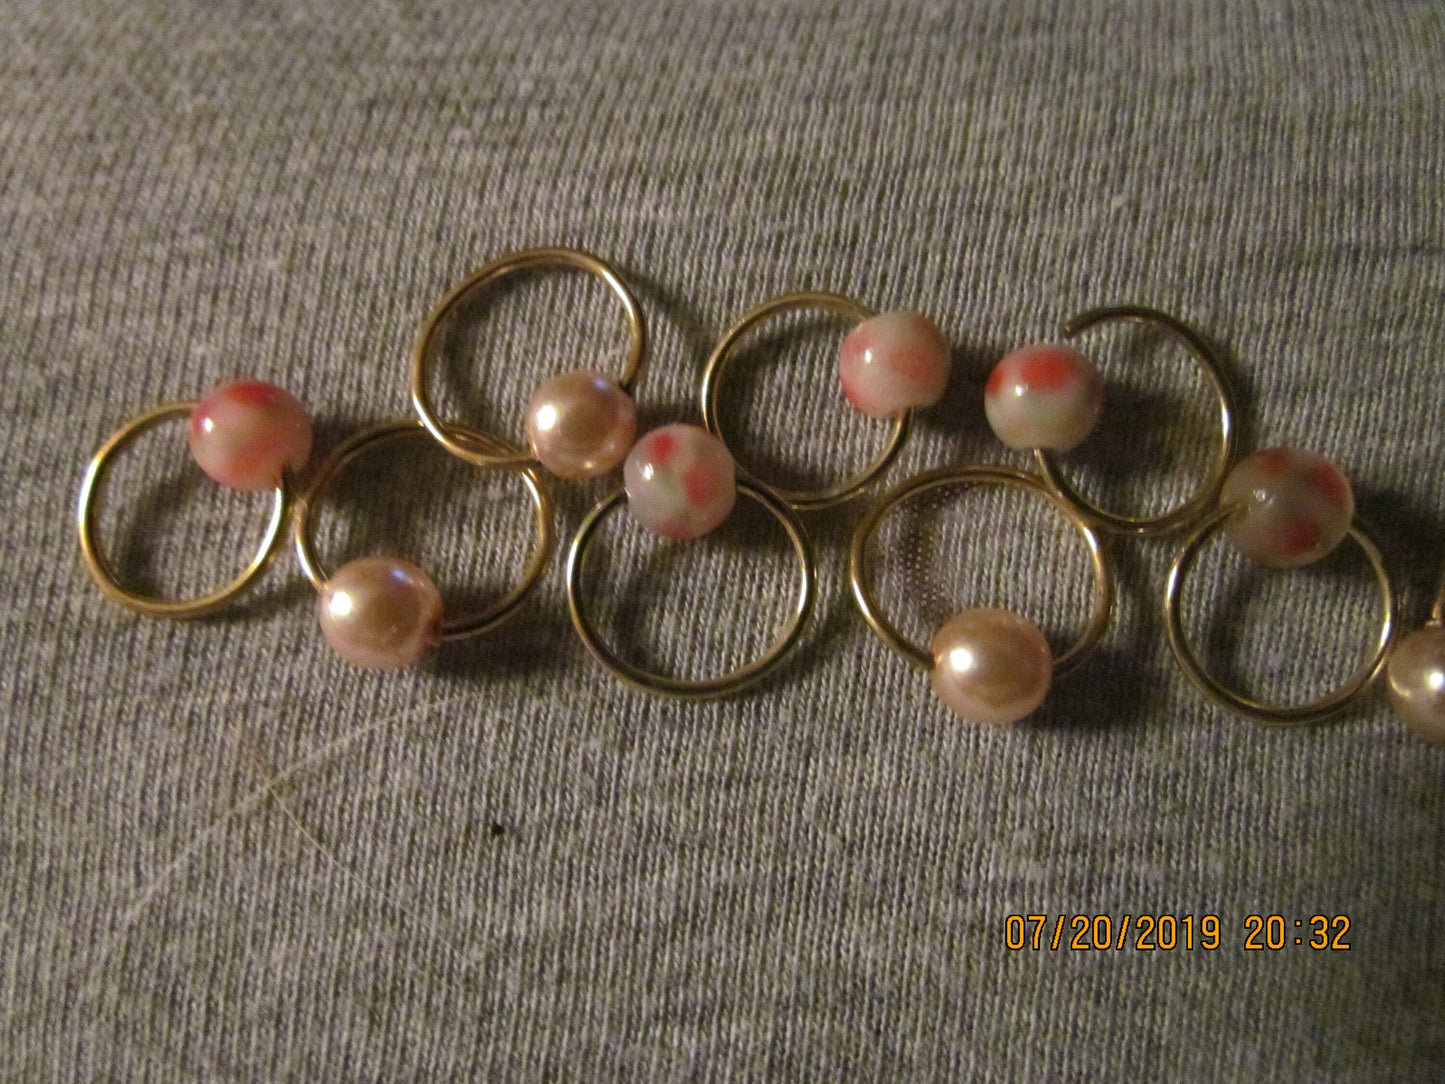 10 Pearl and Pink Flowers Stitch Markers Glass Beads